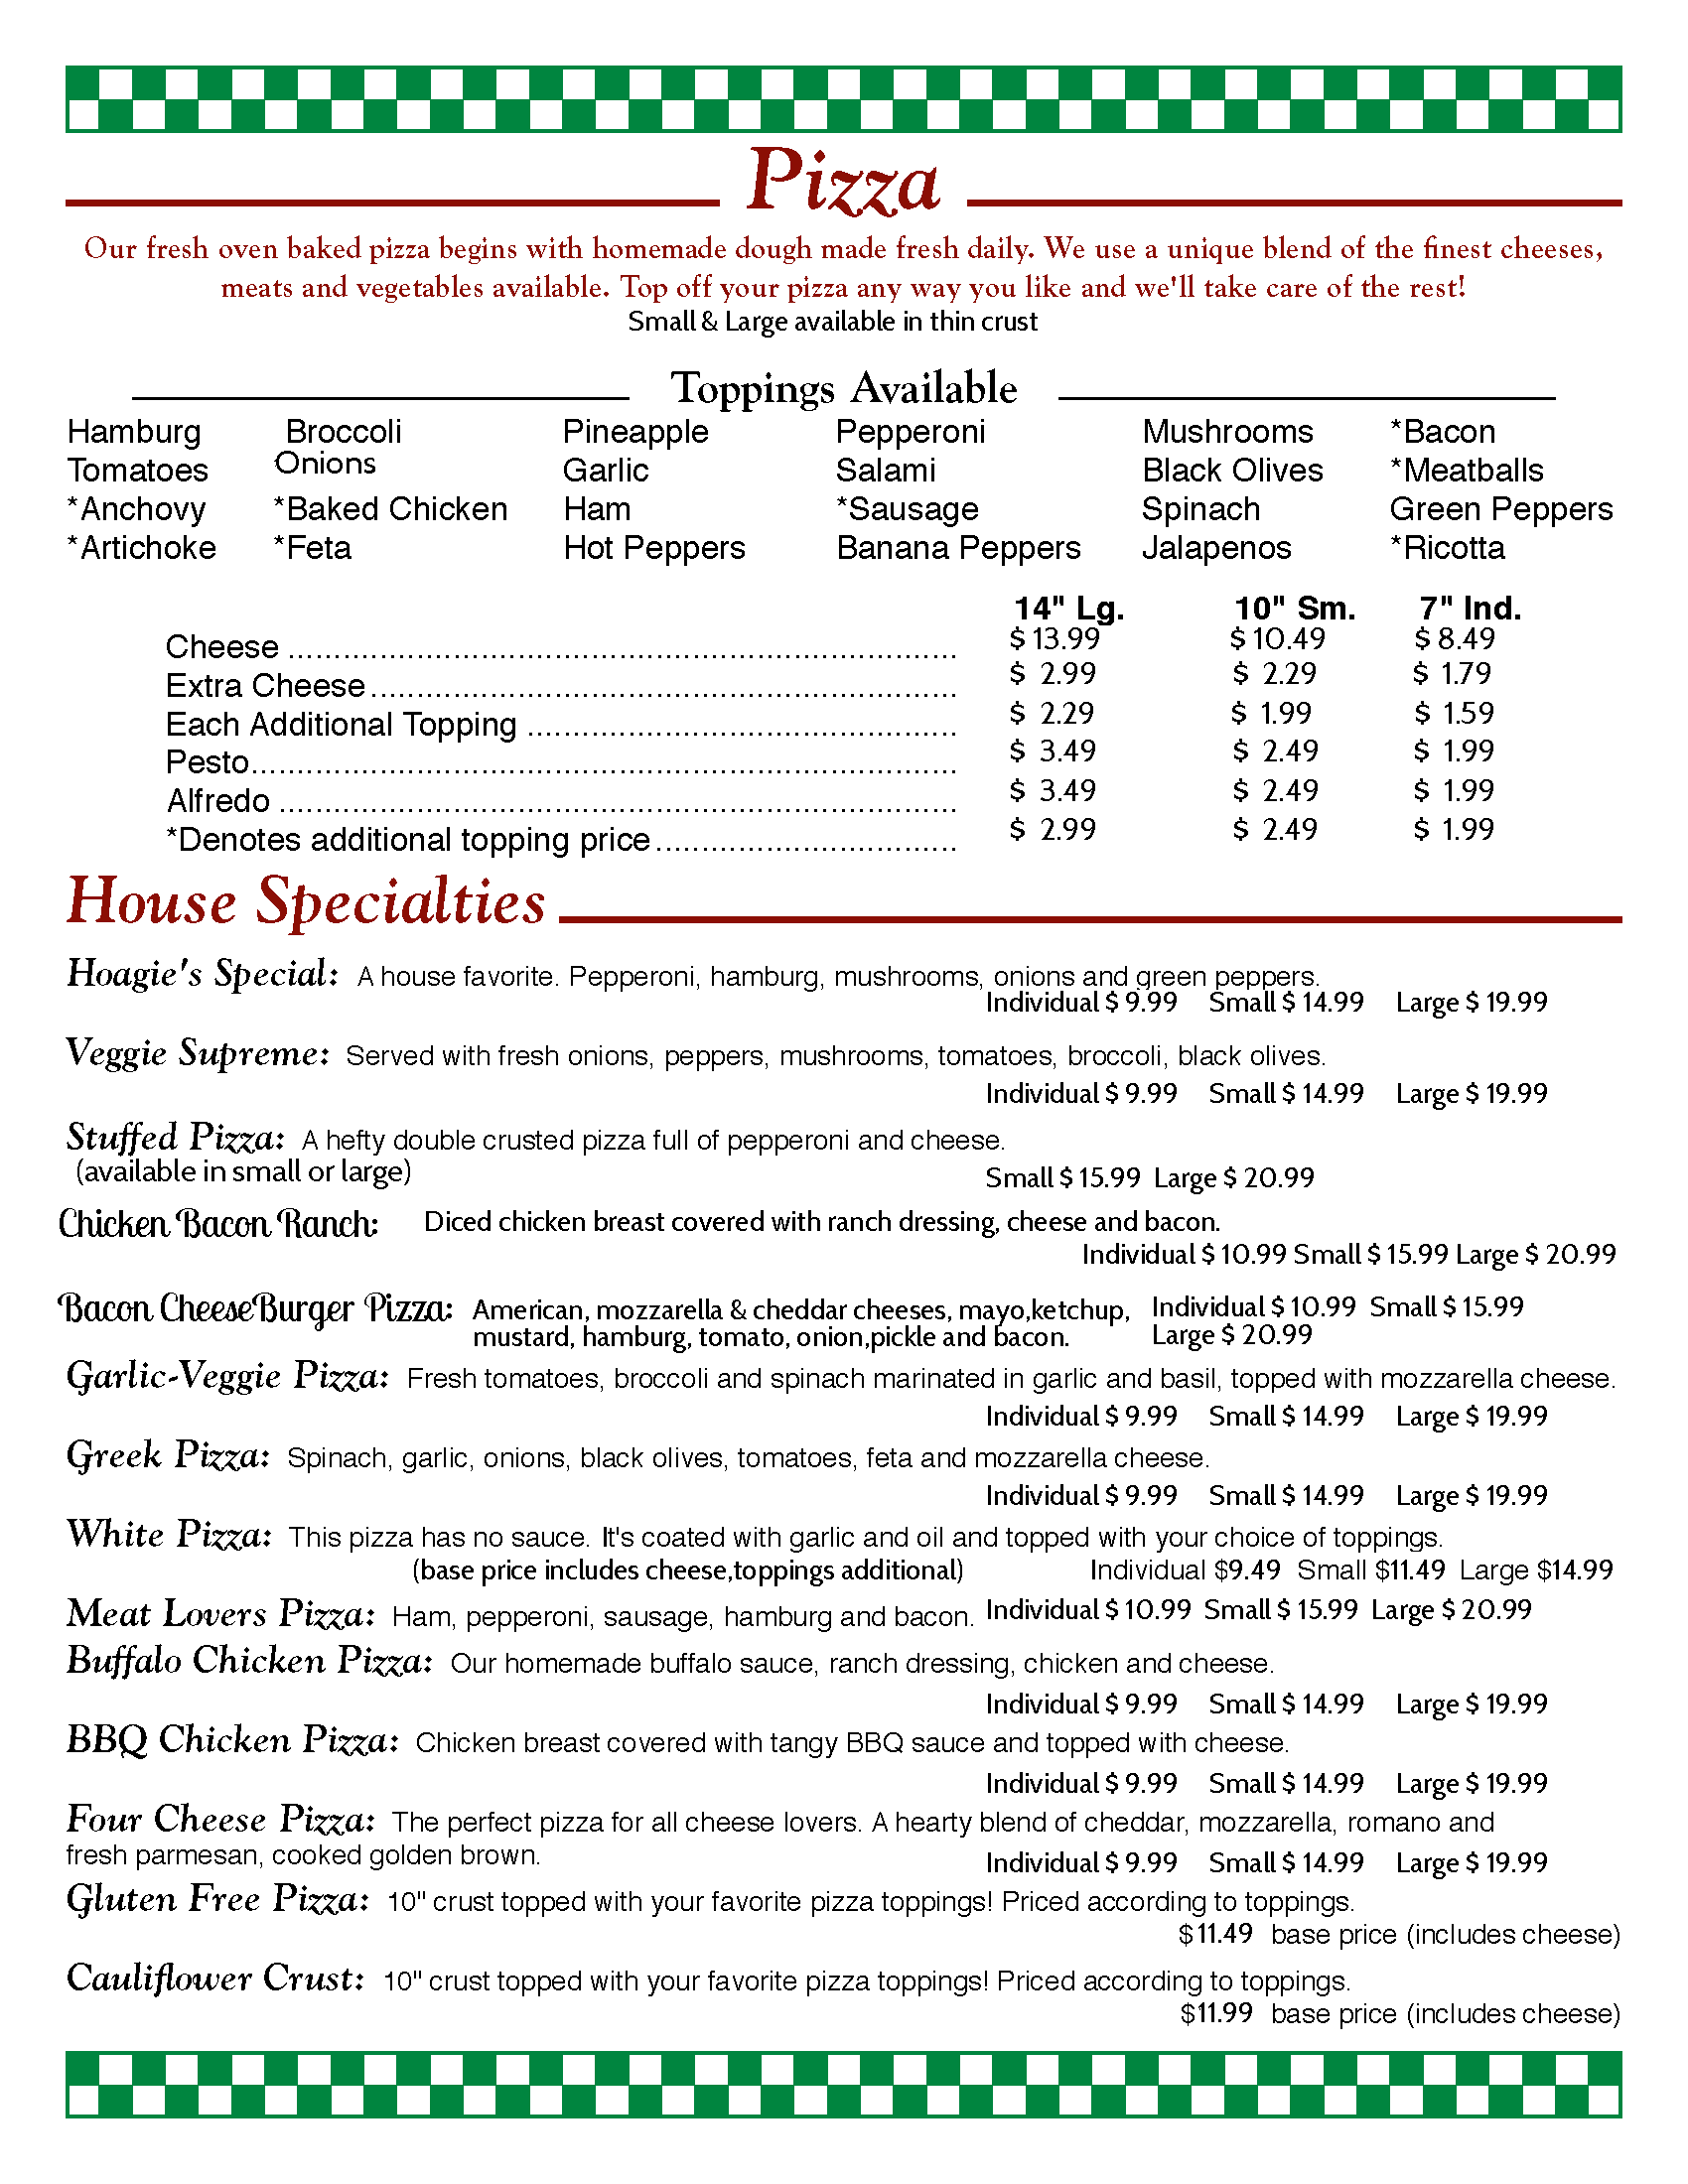 Hoagie's pizza and pasta menu page 3